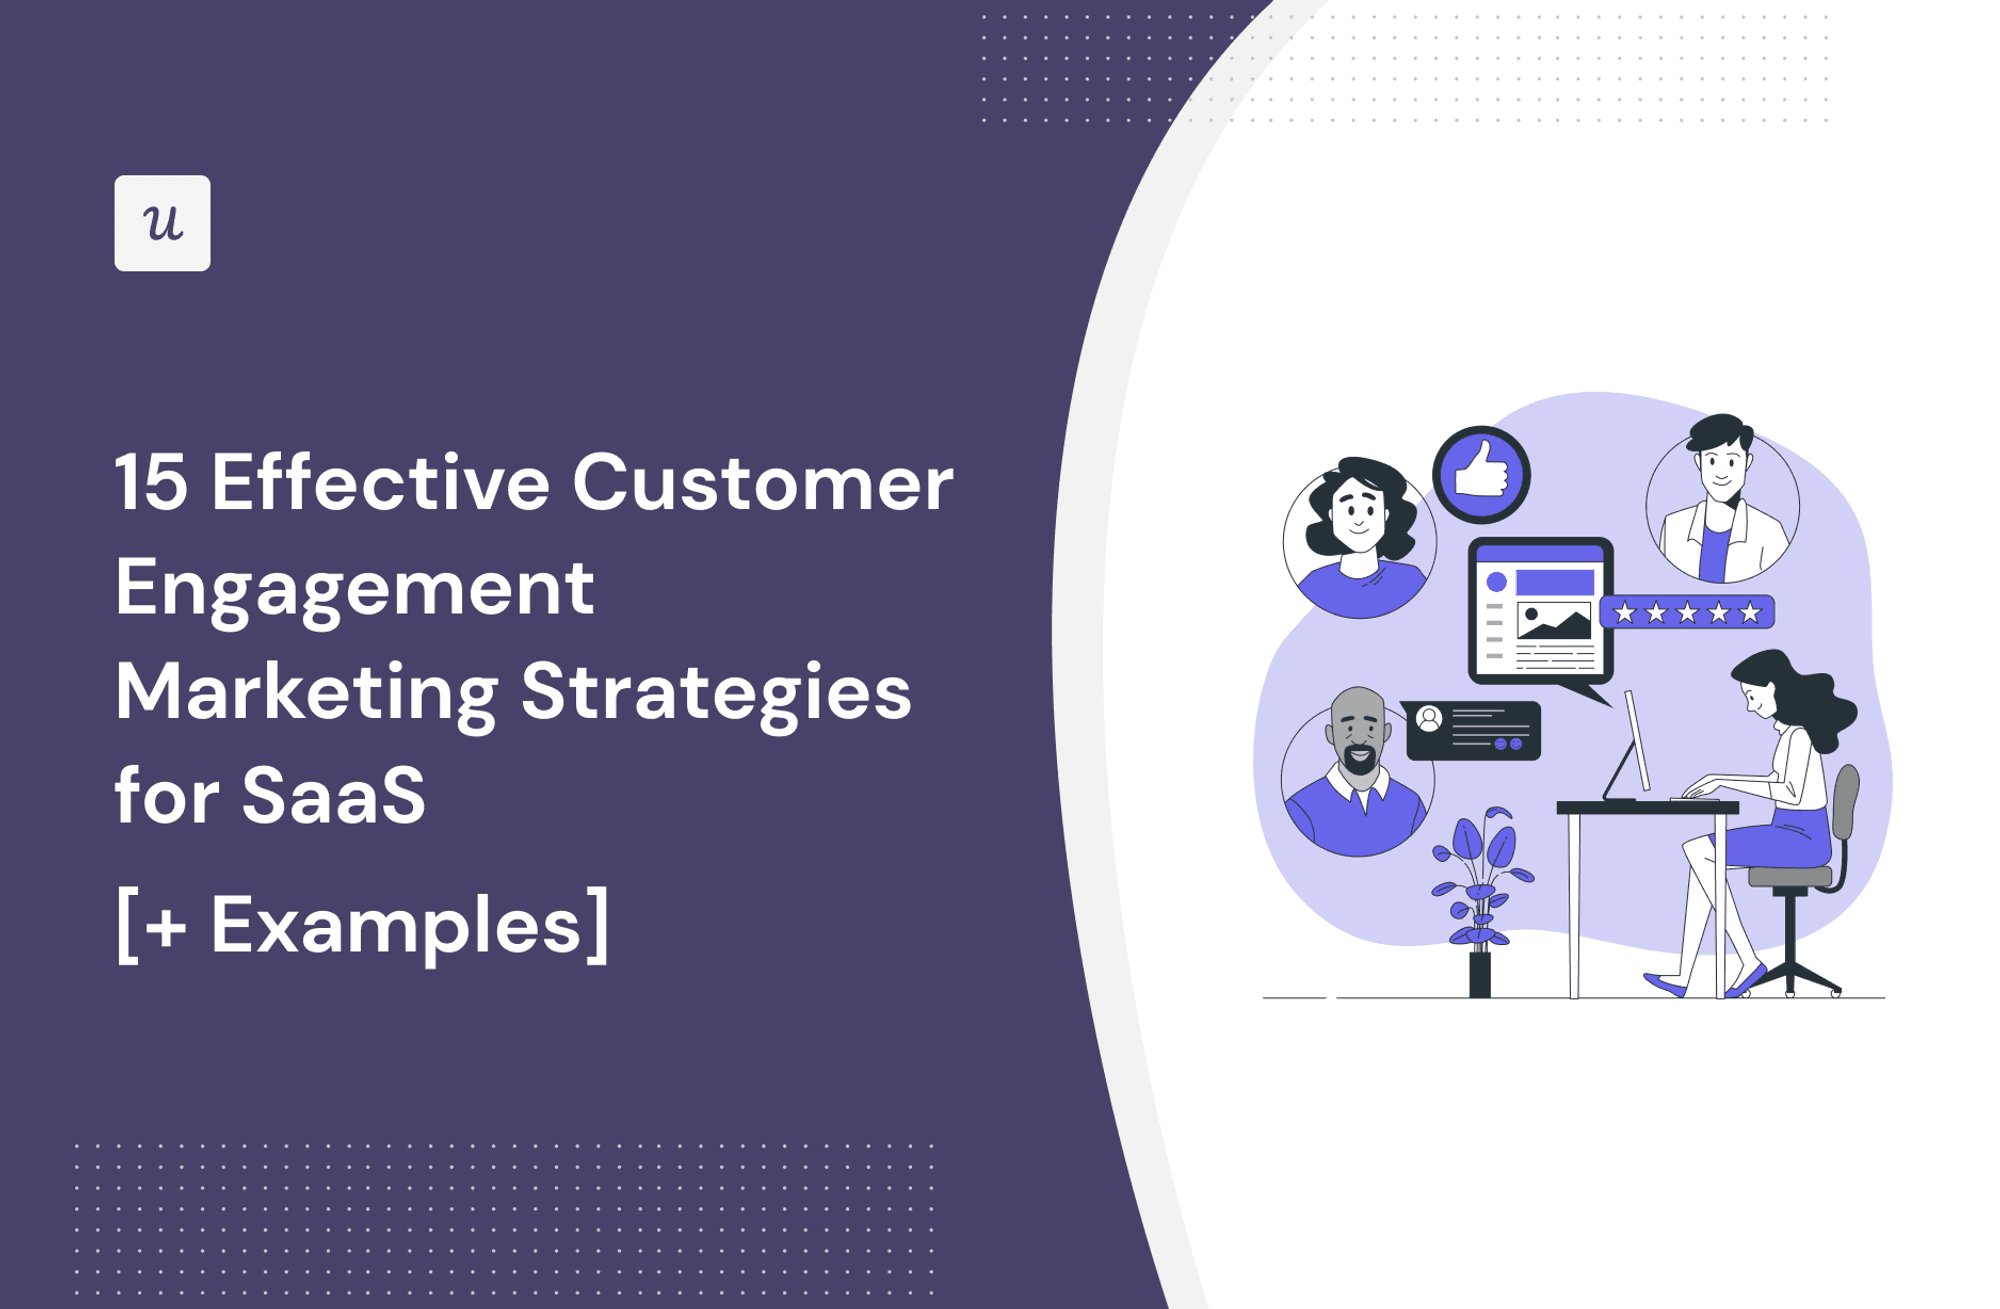 15 Effective Customer Engagement Marketing Strategies for SaaS [+ Examples] cover